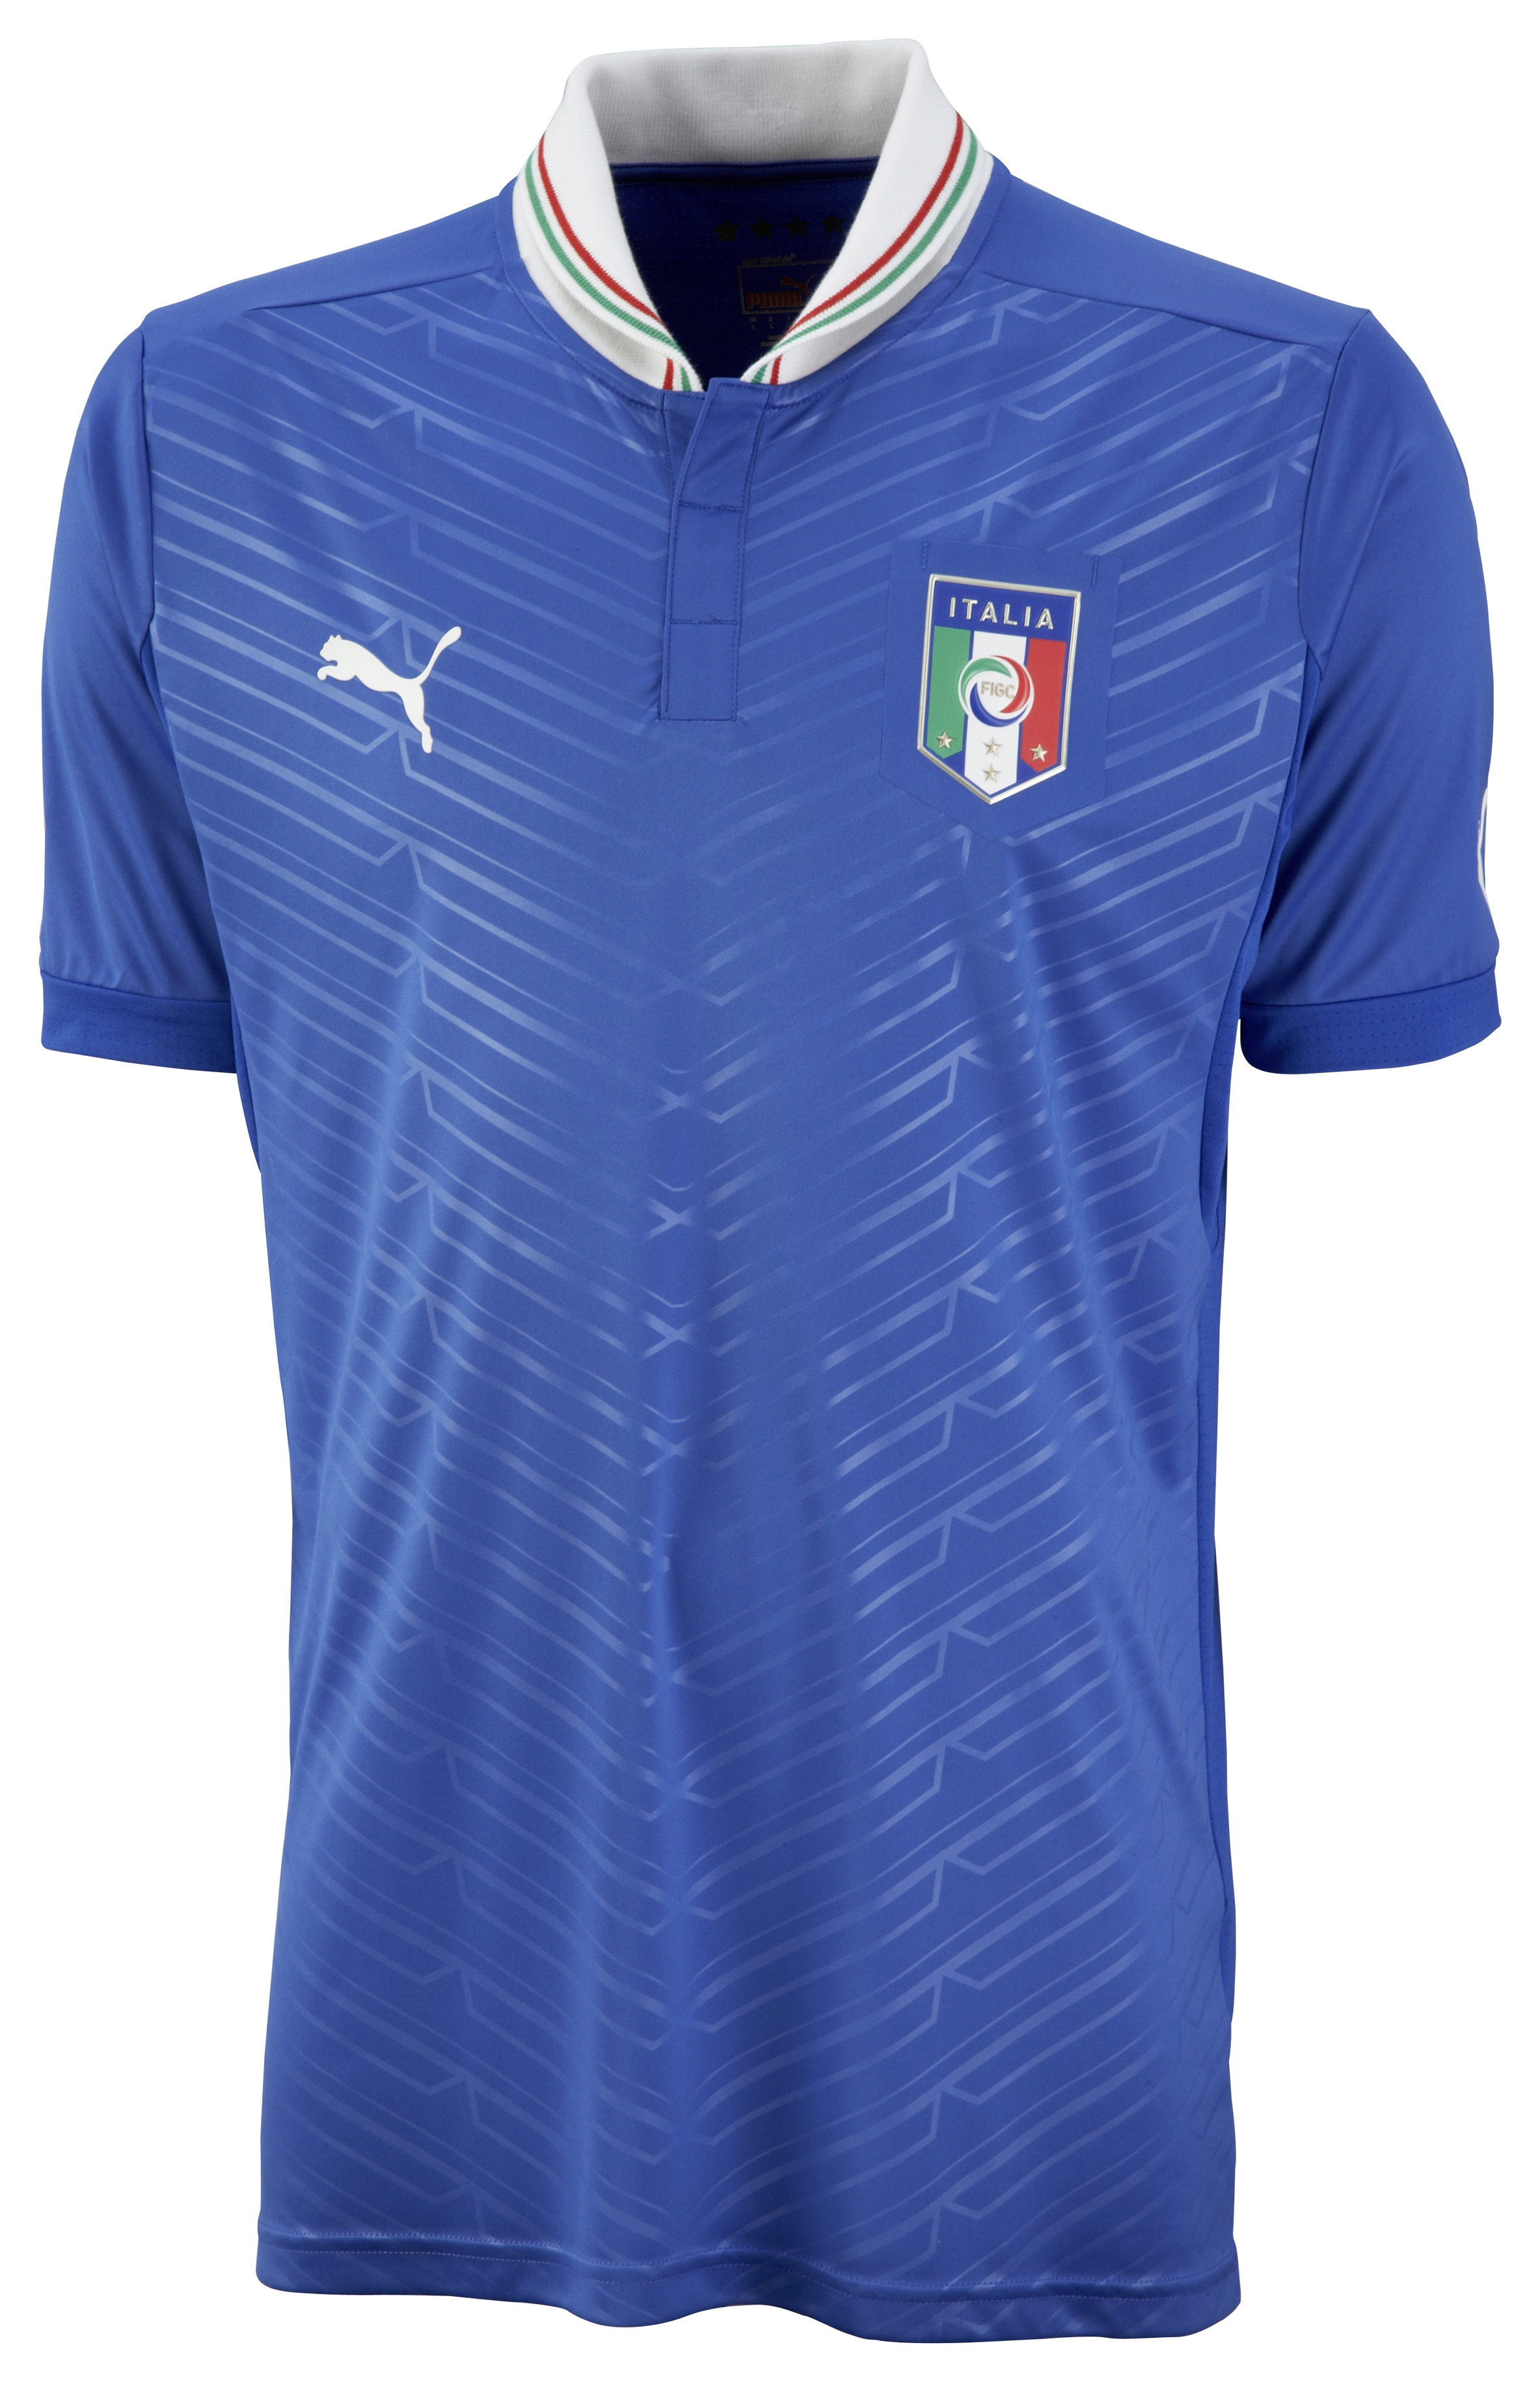 Football kit release: – SportLocker home launch new kit 2012 Italy PUMA for Euro